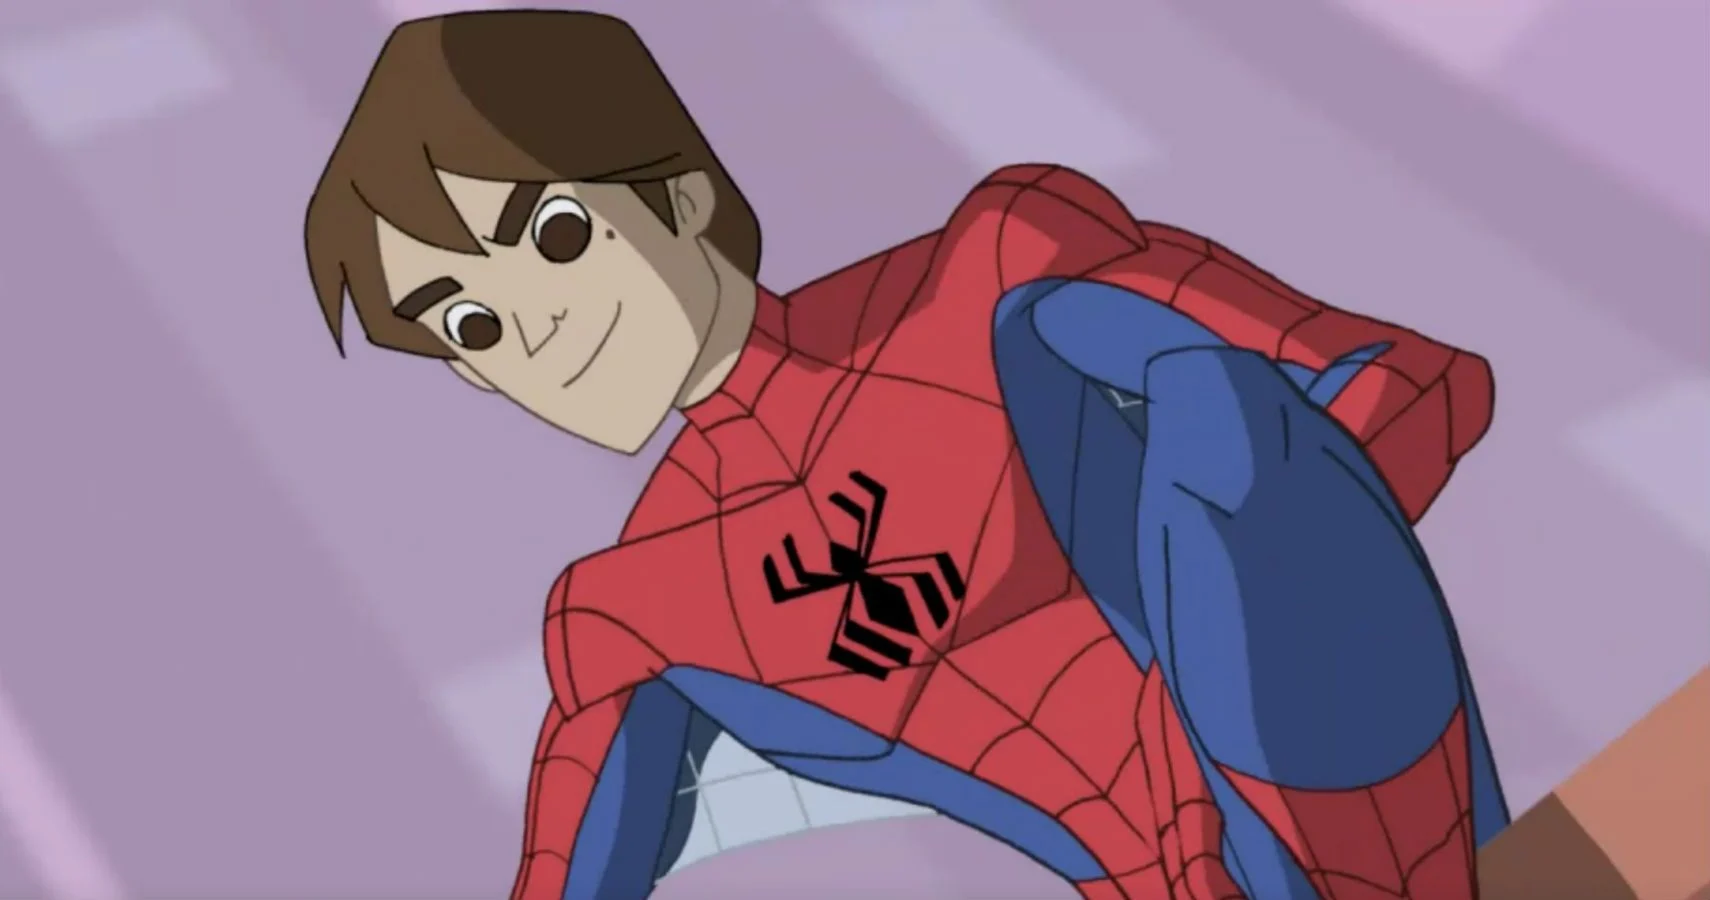 Marvel’s Spectacular Spider-Man is as better as Batman's The Animated Series